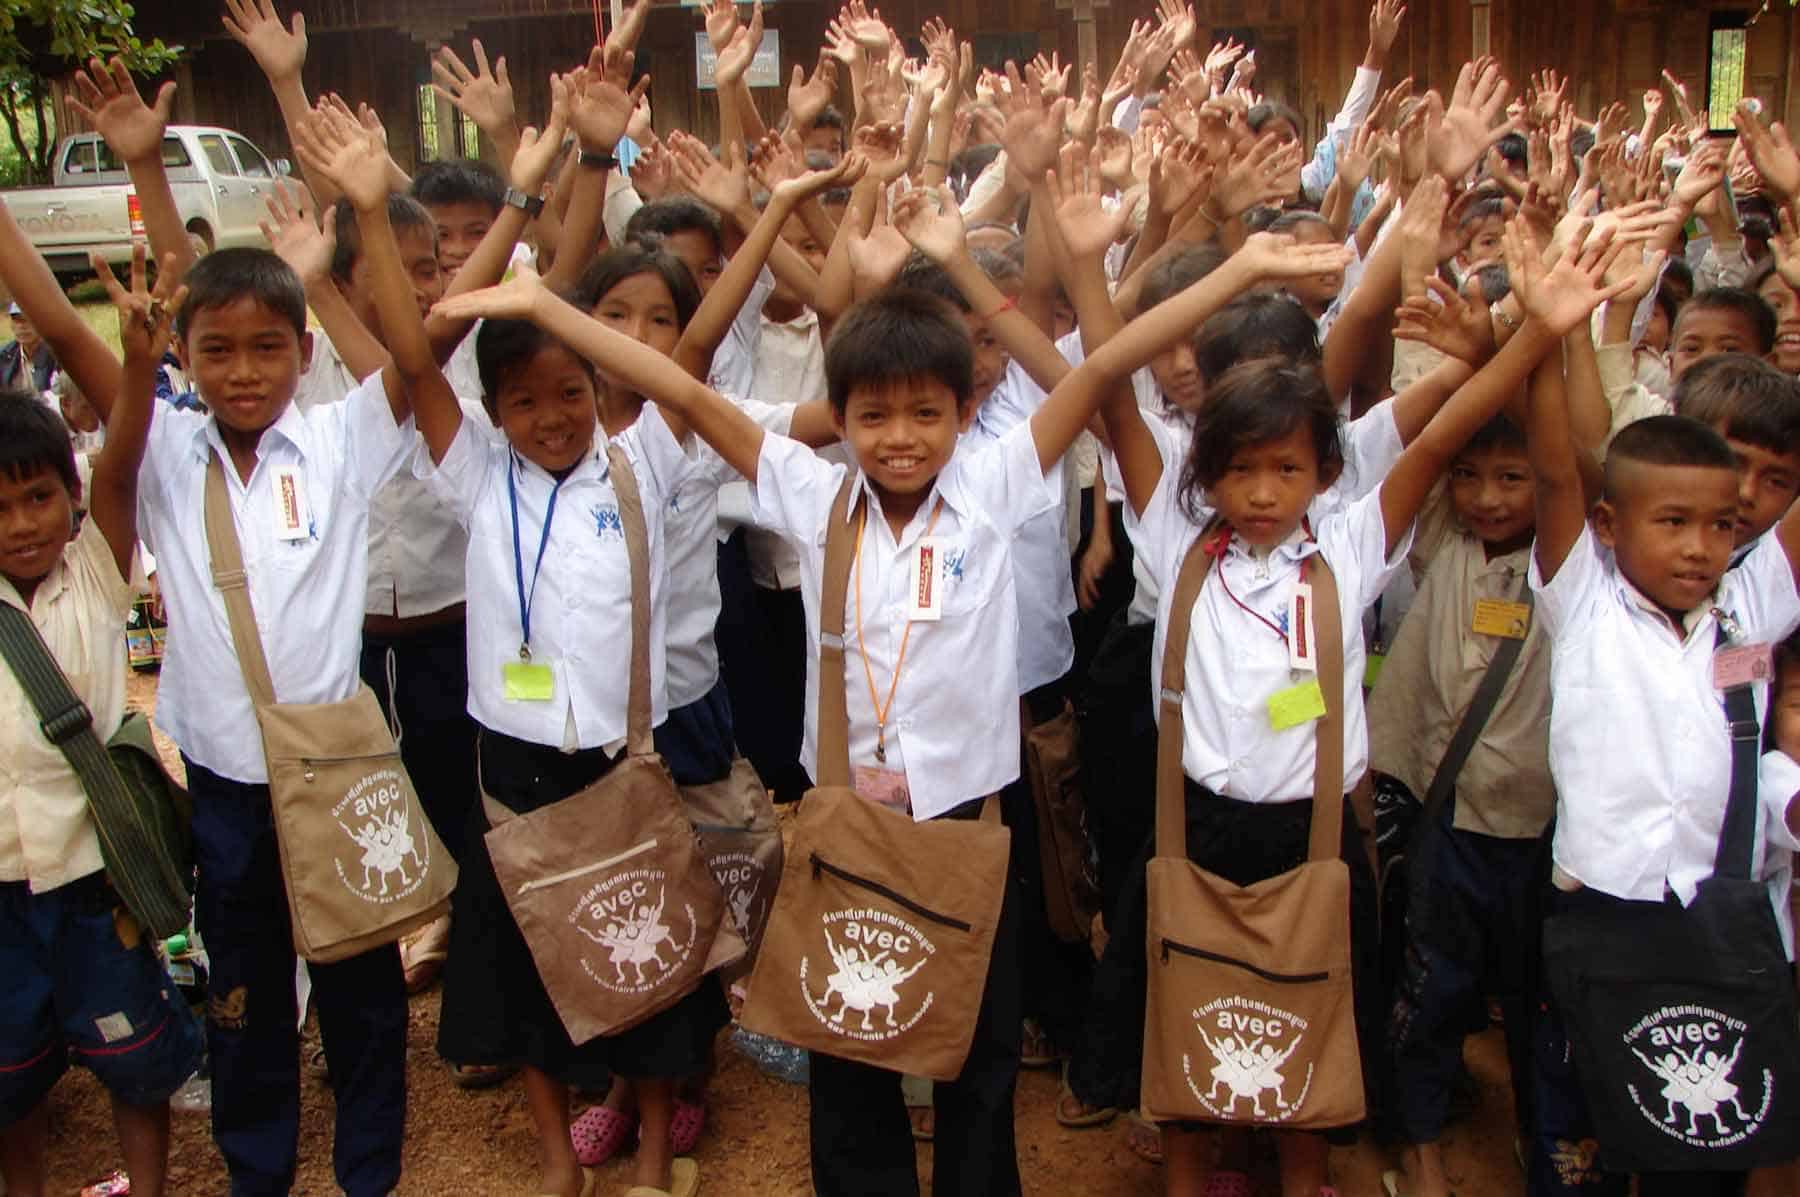 We specialise in locating and educating poor children. We intervene every two months in public schools in Cambodia, with many children.